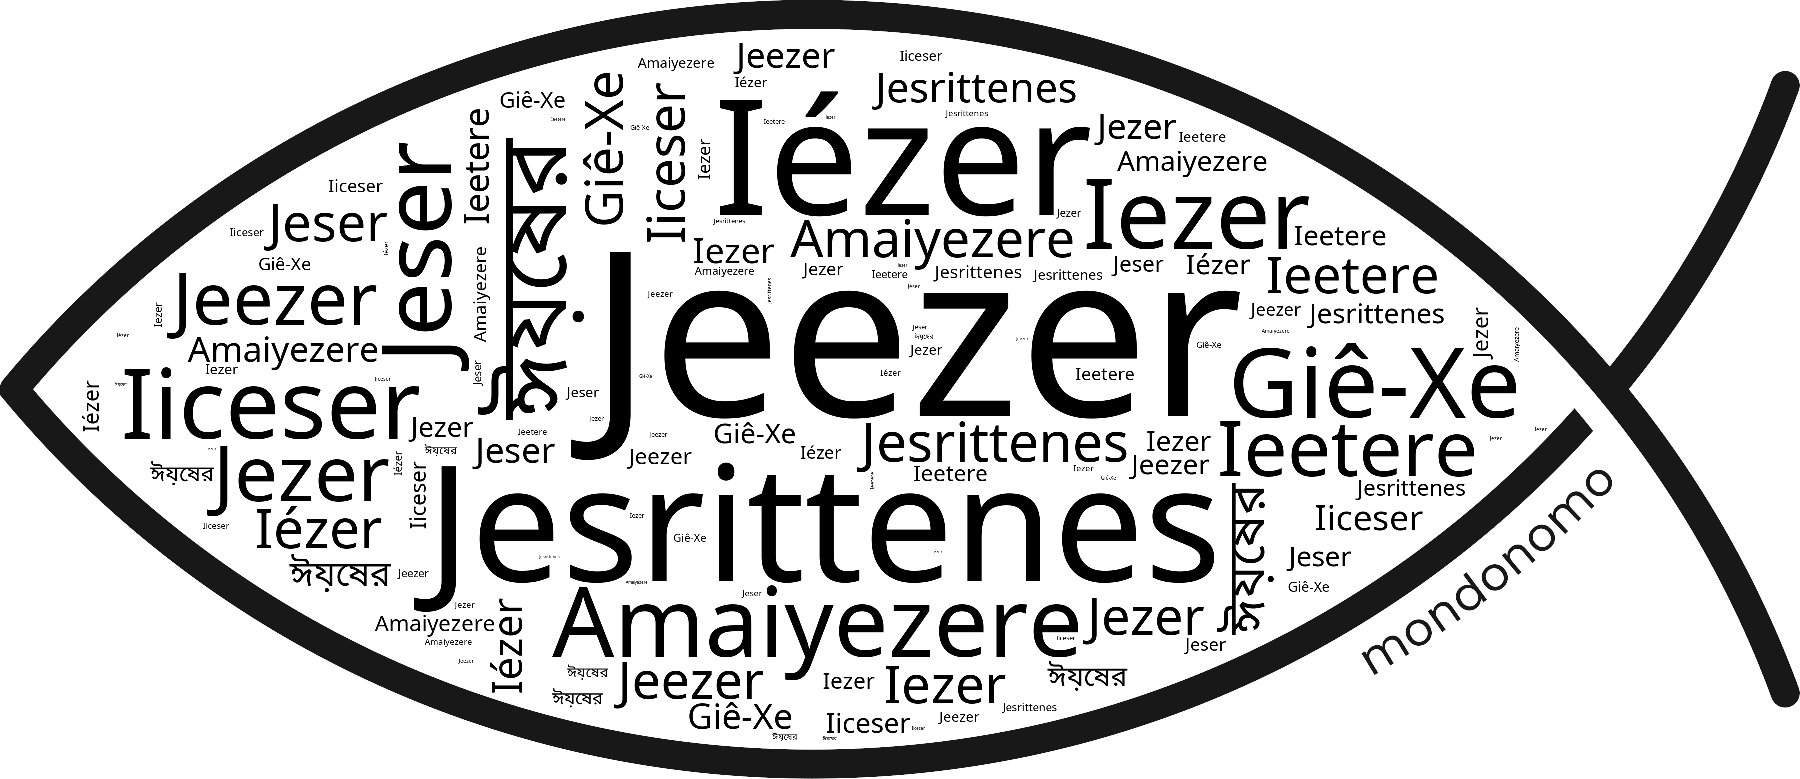 Name Jeezer in the world's Bibles